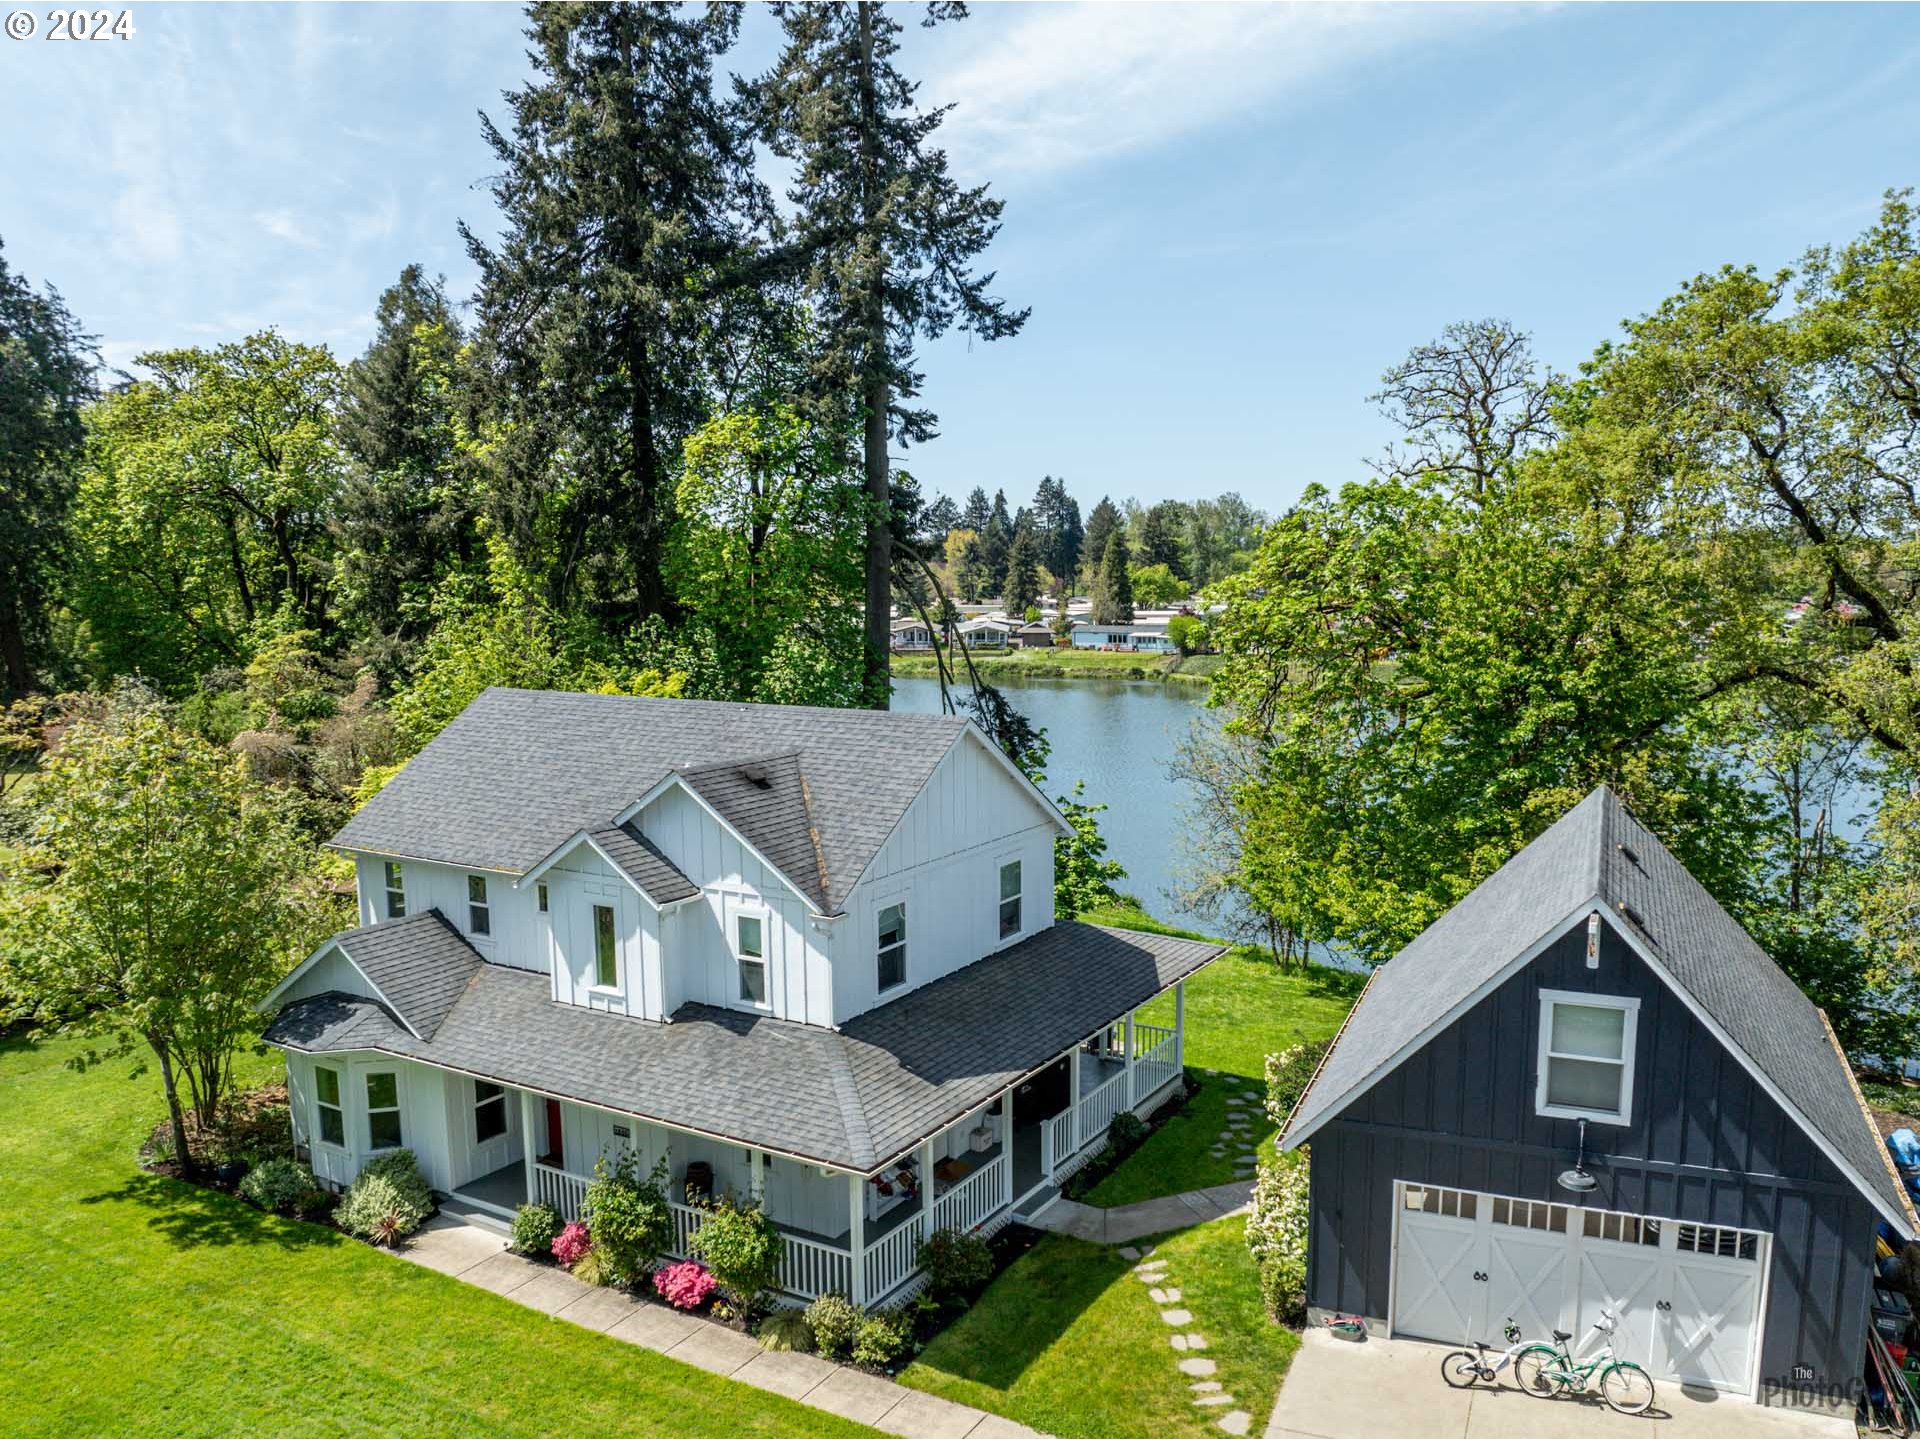 This one of a kind, 2004 built "1920's Farmhouse" is situated on 1.6 acres on Dodson Pond.  Feels like you're in Coburg but you're in North Gilham!  The residence is approached down a long private driveway.  The open, lush front yard lawn wraps all around the property.  You are greeted at the front door by a lazy and beautiful wrap around covered veranda ideal for sipping tea and cheering on the kids playing ball.  Upon entering this home, you are transported to easy living with beautiful views from every window. Gorgeous living room is just at entrance with painted wood floors and bay window.  The main living area features a large kitchen with island, craftsman cabinetry/details, lovely dining nook, island, new stainless range and hood.  The kitchen is open to family room for cozy nights warmed by vintage gas stove.  Main floor also features a bedroom which could be bedroom/office/den with full bath with clawfoot tub.  Tankless water heater for luxuriating in long, long baths...   Upstairs features two bedrooms, full bath/laundry room PLUS Primary Suite:  very large with wonderful views, circa 1920 primary bath featuring a clawfoot tub plus walk in shower, walk-in closet. The large, covered veranda on the back of home is ideal for entertaining friends and family while enjoying the most beautiful sunsets!   The extra-large garage has a finished bonus room upstairs that can be an additional flex space for working out/office/hobby!  A new staircase has been added from the backyard down to the large waterfront area of Dobson Pond ideal for paddle board, canoeing, fish (bass!) or just enjoy the ducks and geese floating by... easy country living... but you're close to everything in town!